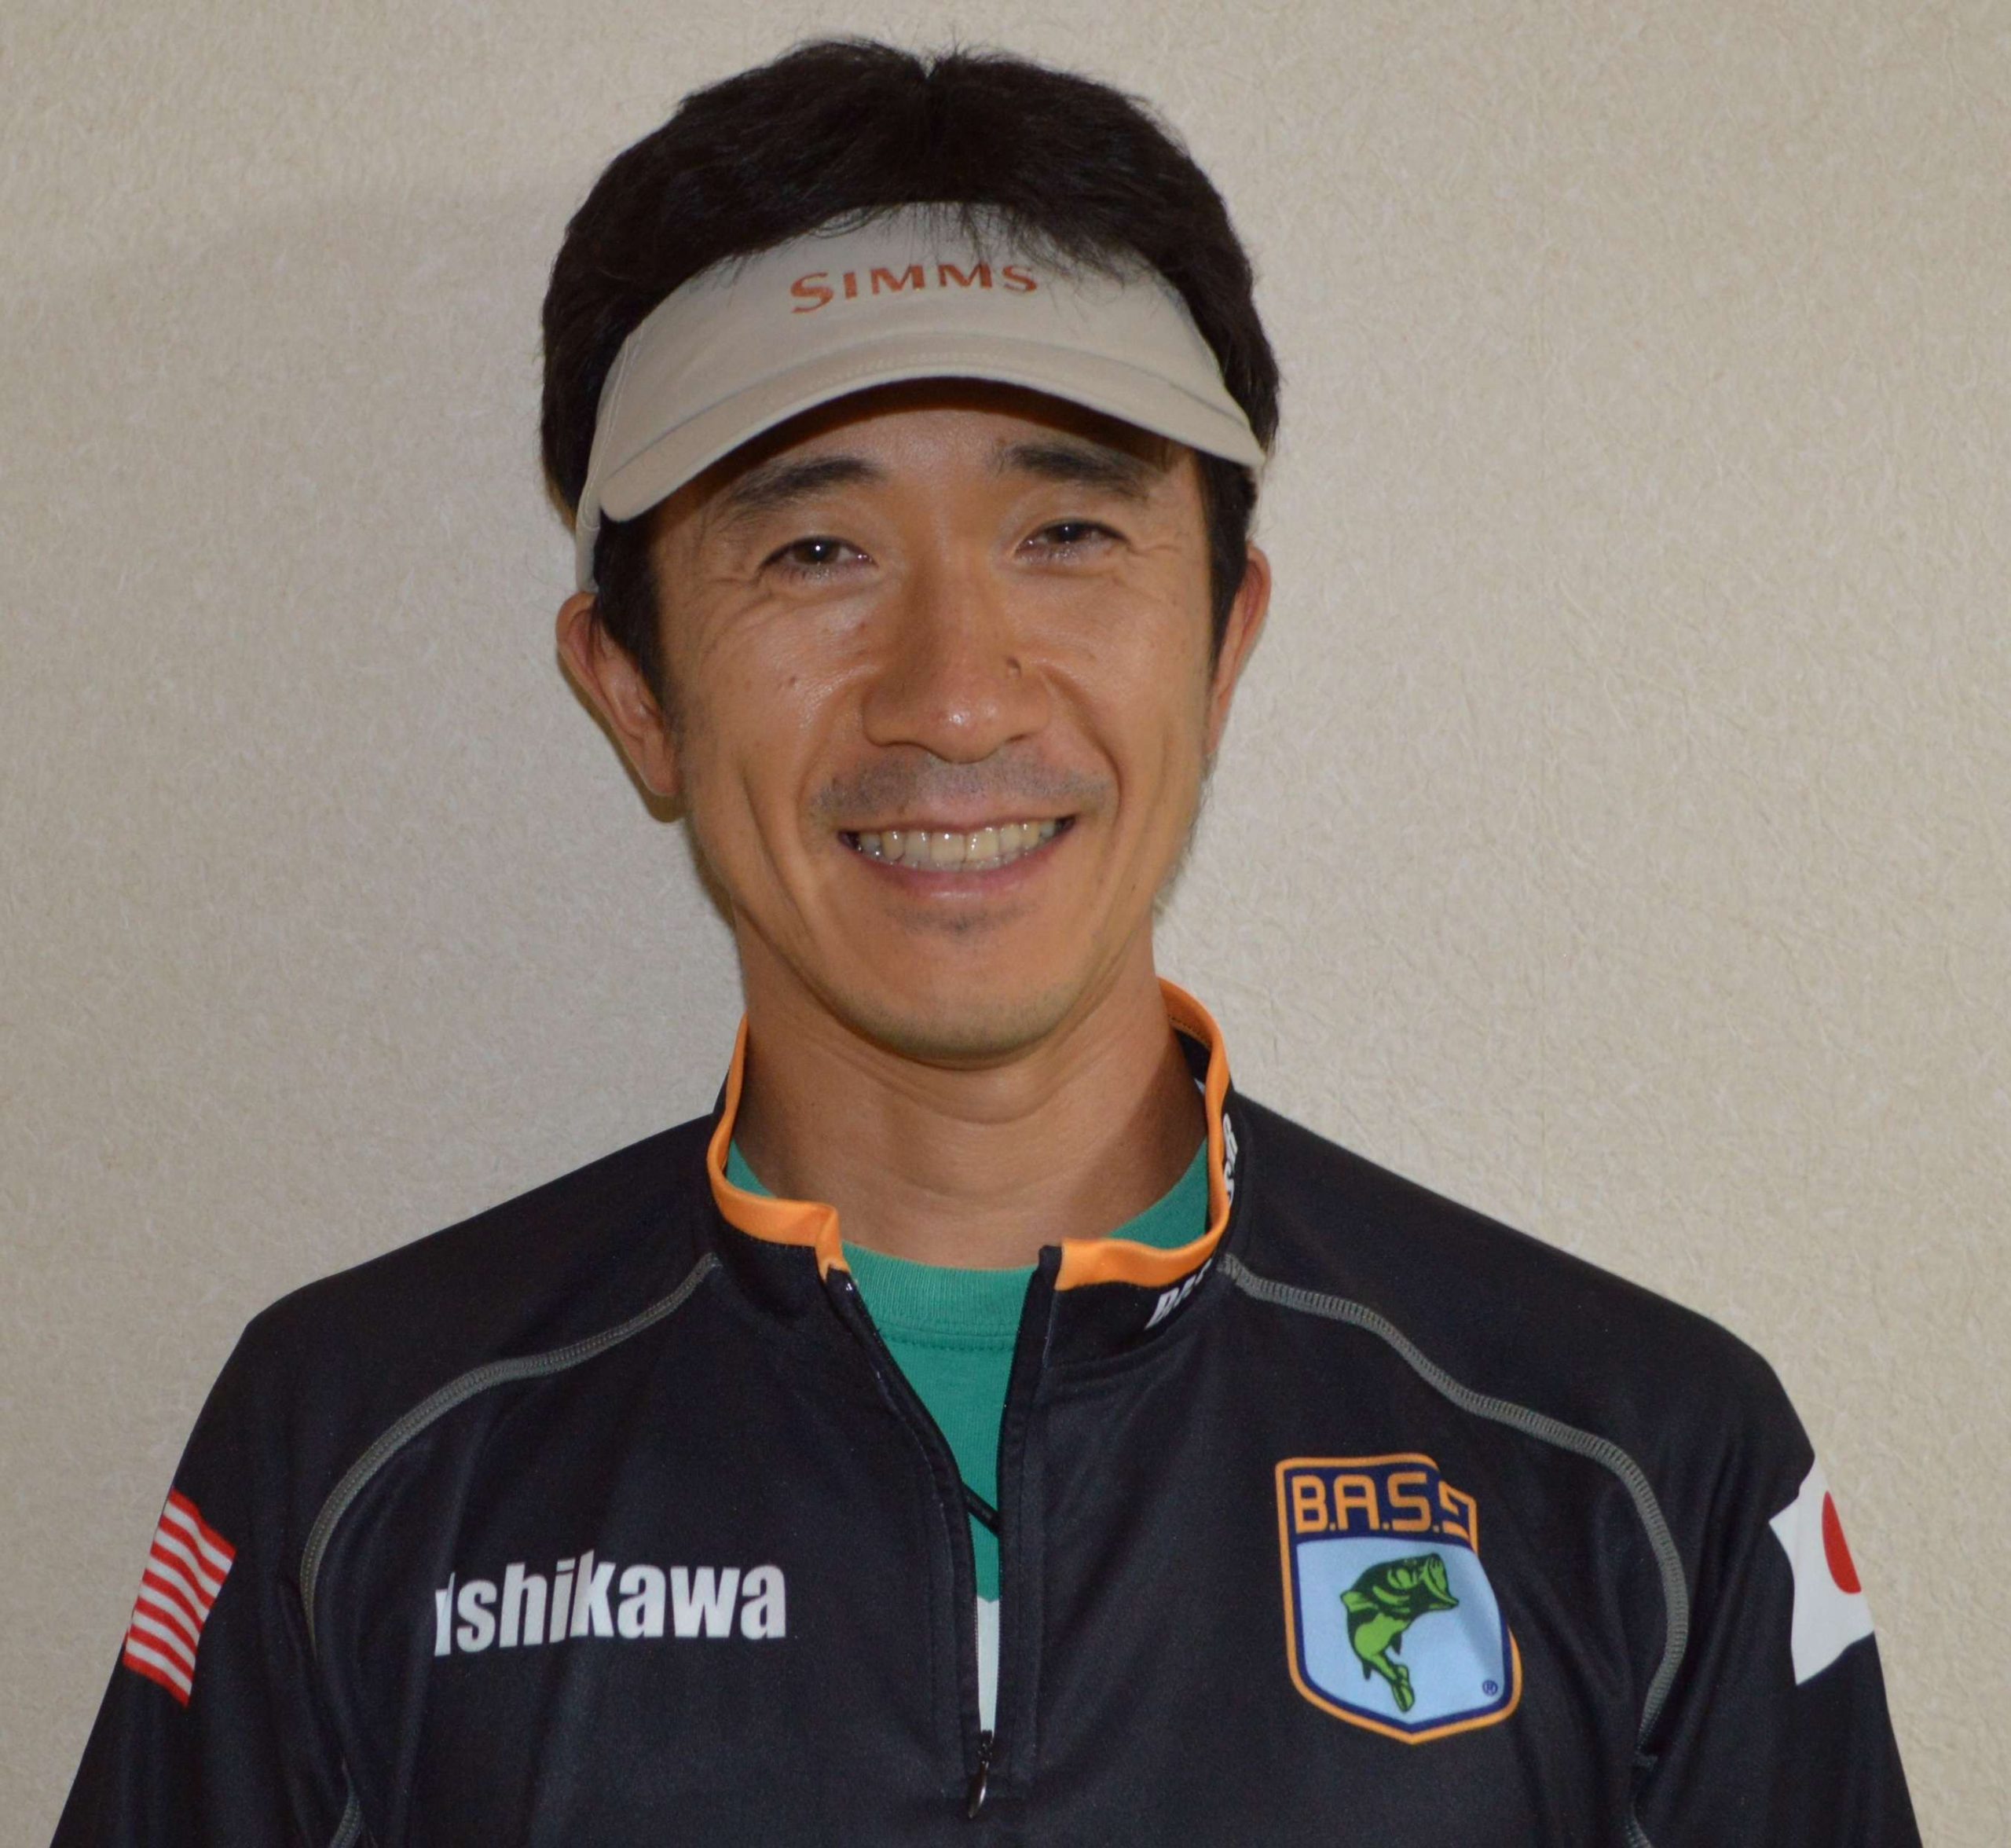 Naoaki Ishikawa <br>
Japan Boater <br>
Naoaki Ishikawa of Tokyo will come to this side of the globe to compete on behalf of Japan. He works for the local government back home, and this will be his first Nation Championship. He is sponsored by North Wave, and heâs a member of the Shonan Bassmasters. Ishikawa likes rugby and football.